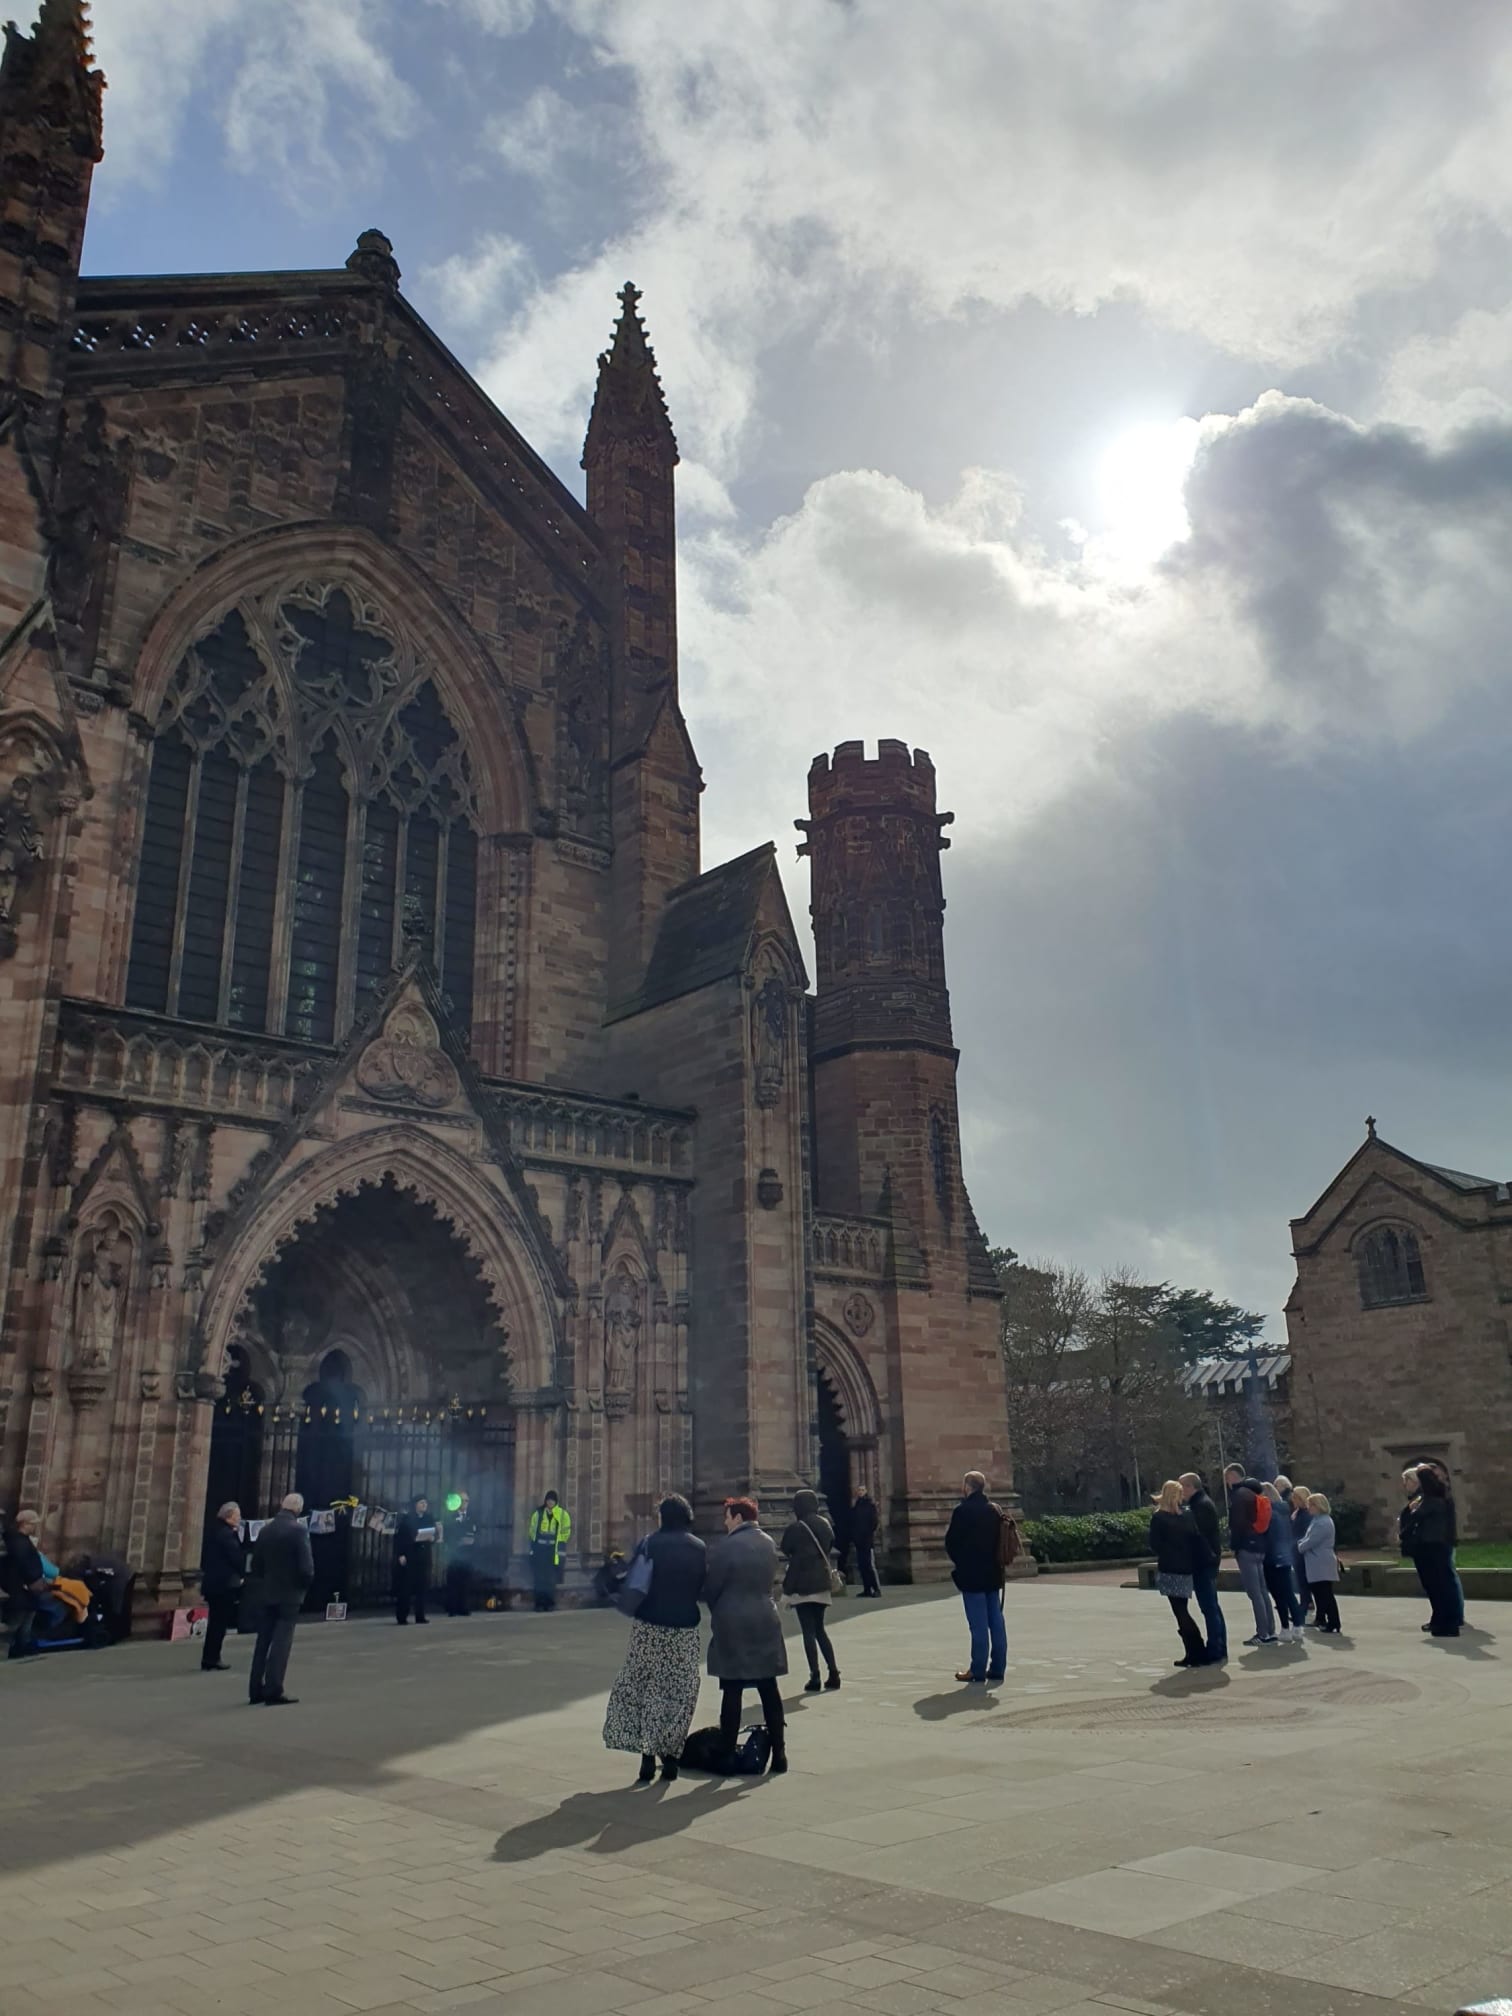 The sun breaks through the clouds above the West End of the cathedral